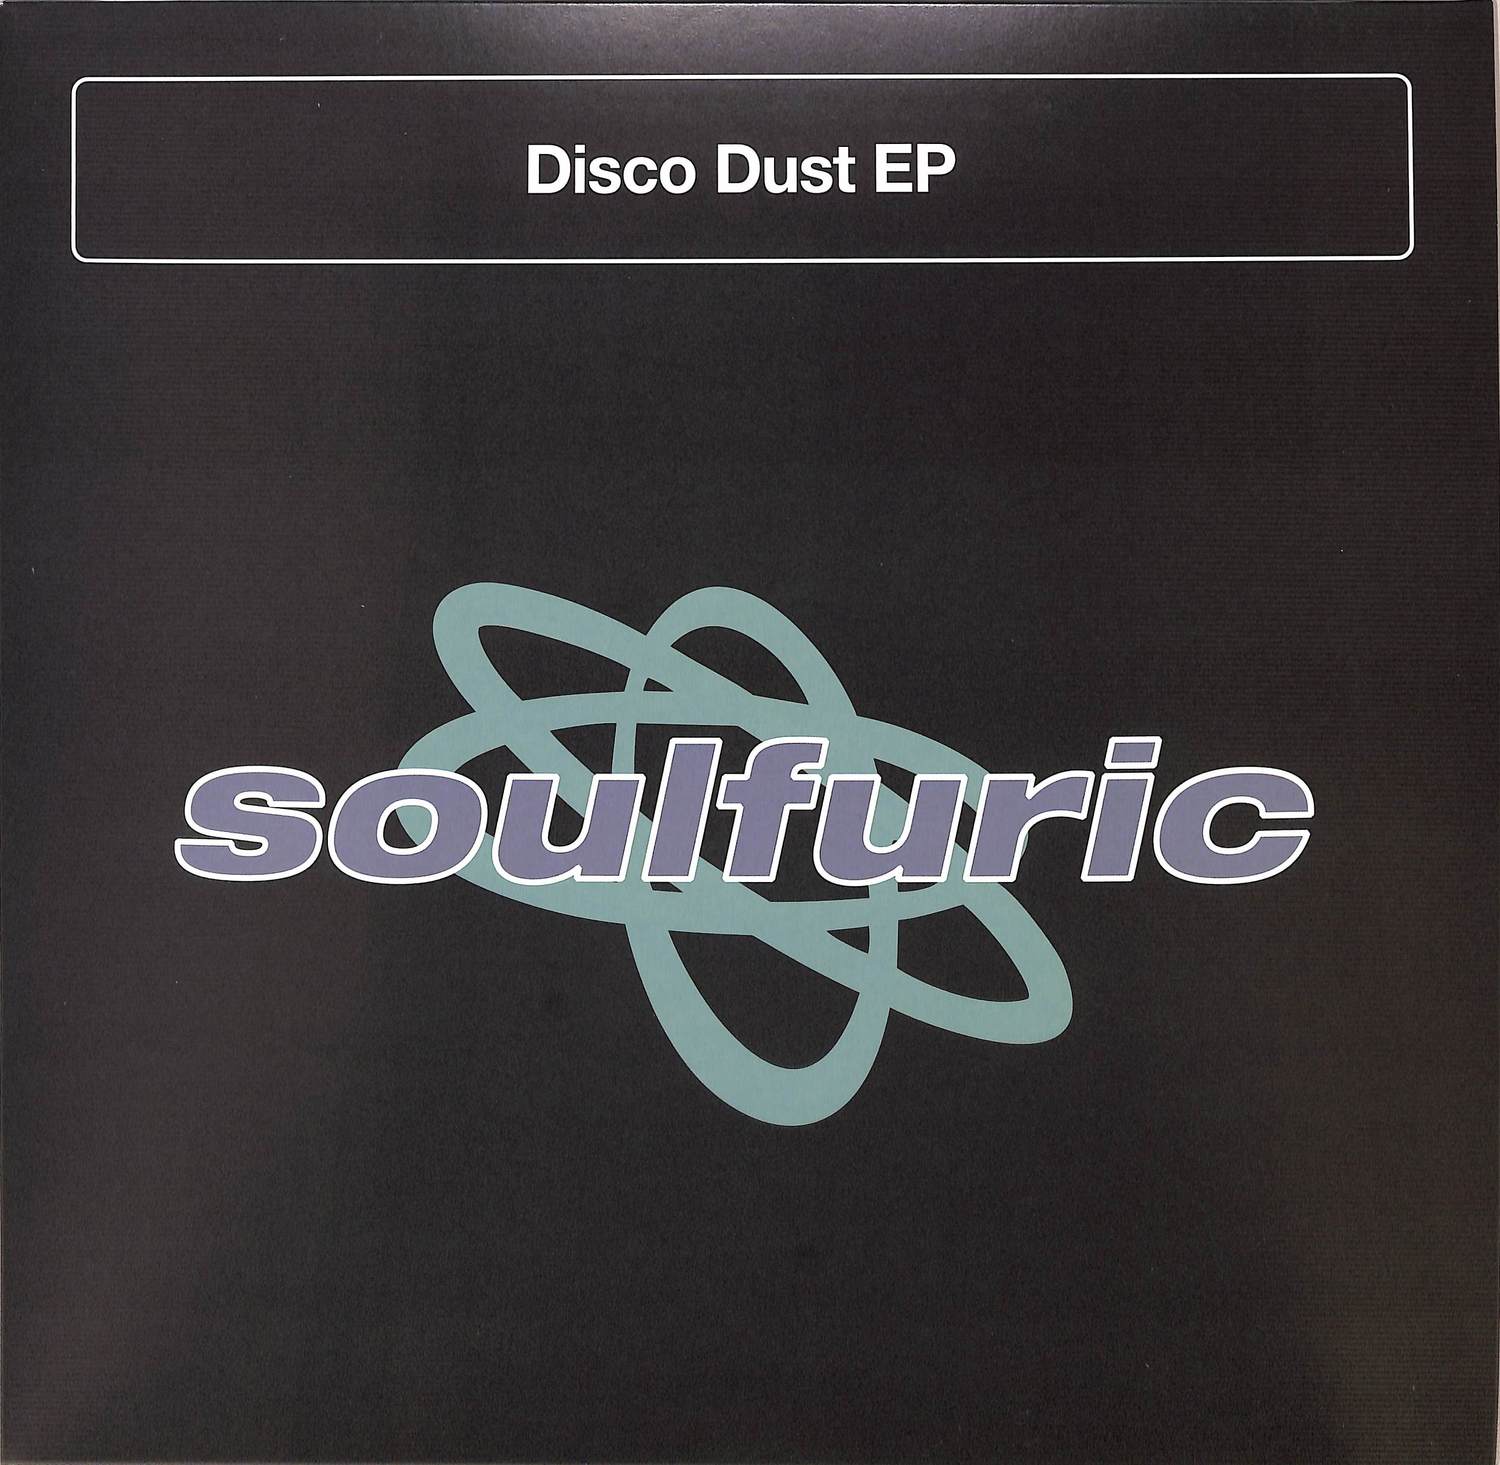 Soulsearcher, Bobby D Ambrosio, The Lab Rats, Hardsoul - DISCO DUST EP 